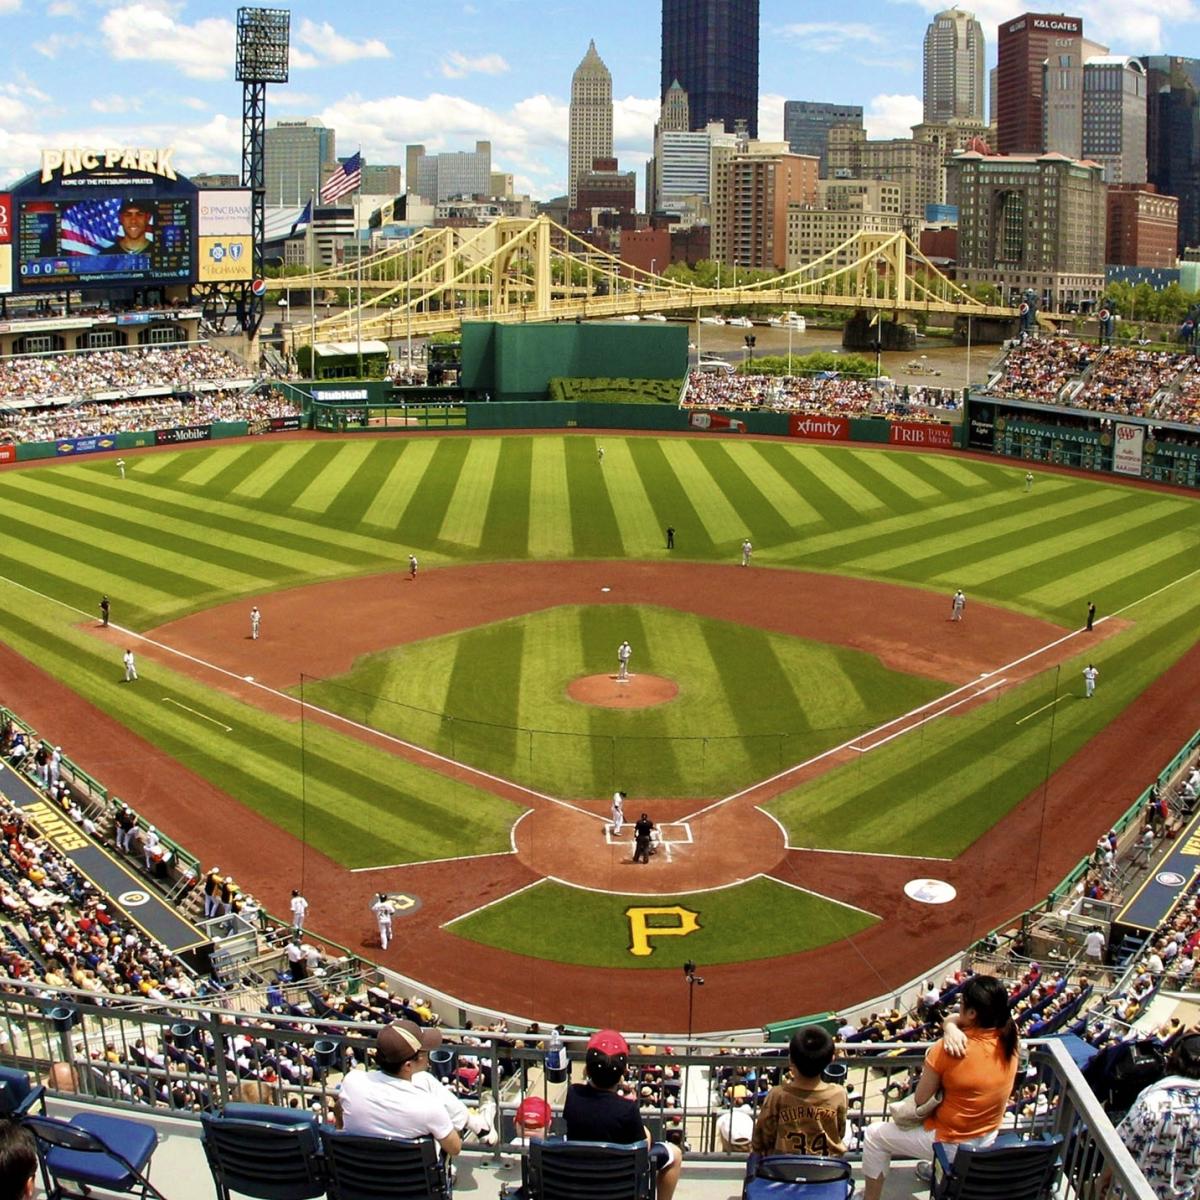 Faster lines, shorter wait times, other upgrades at PNC Park